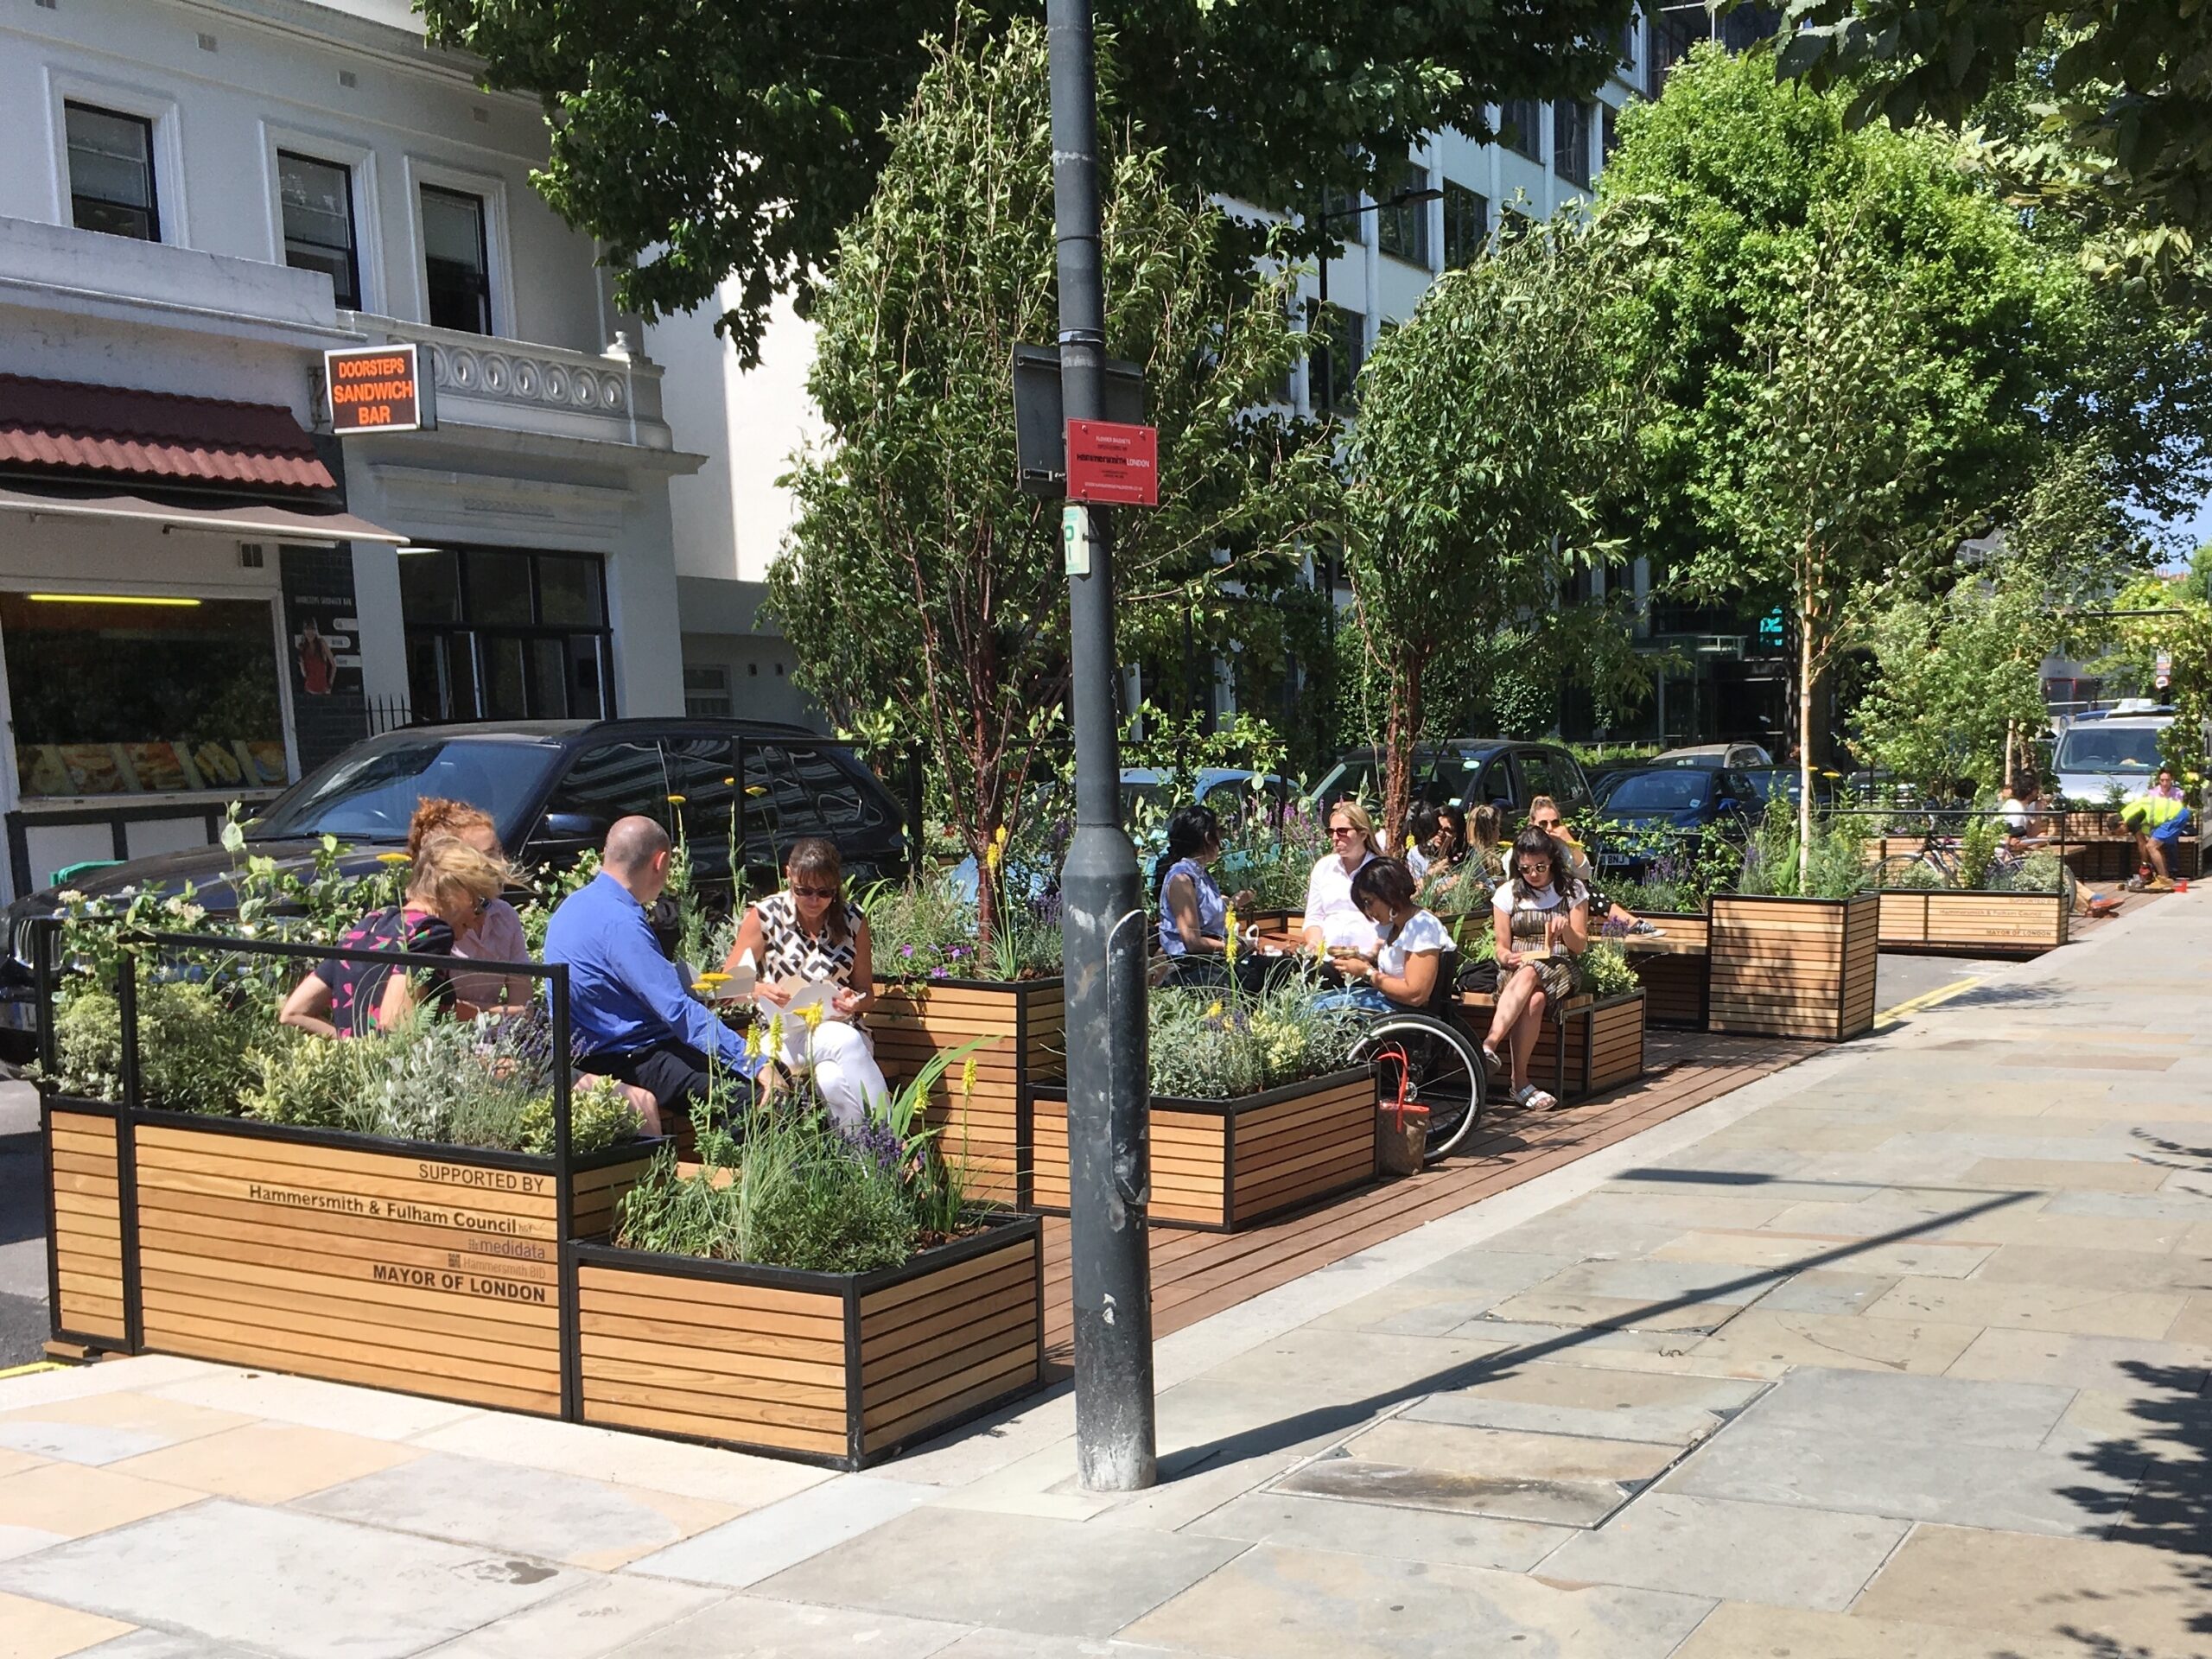 People sit in a small space with plant boxes in the middle of a city street.